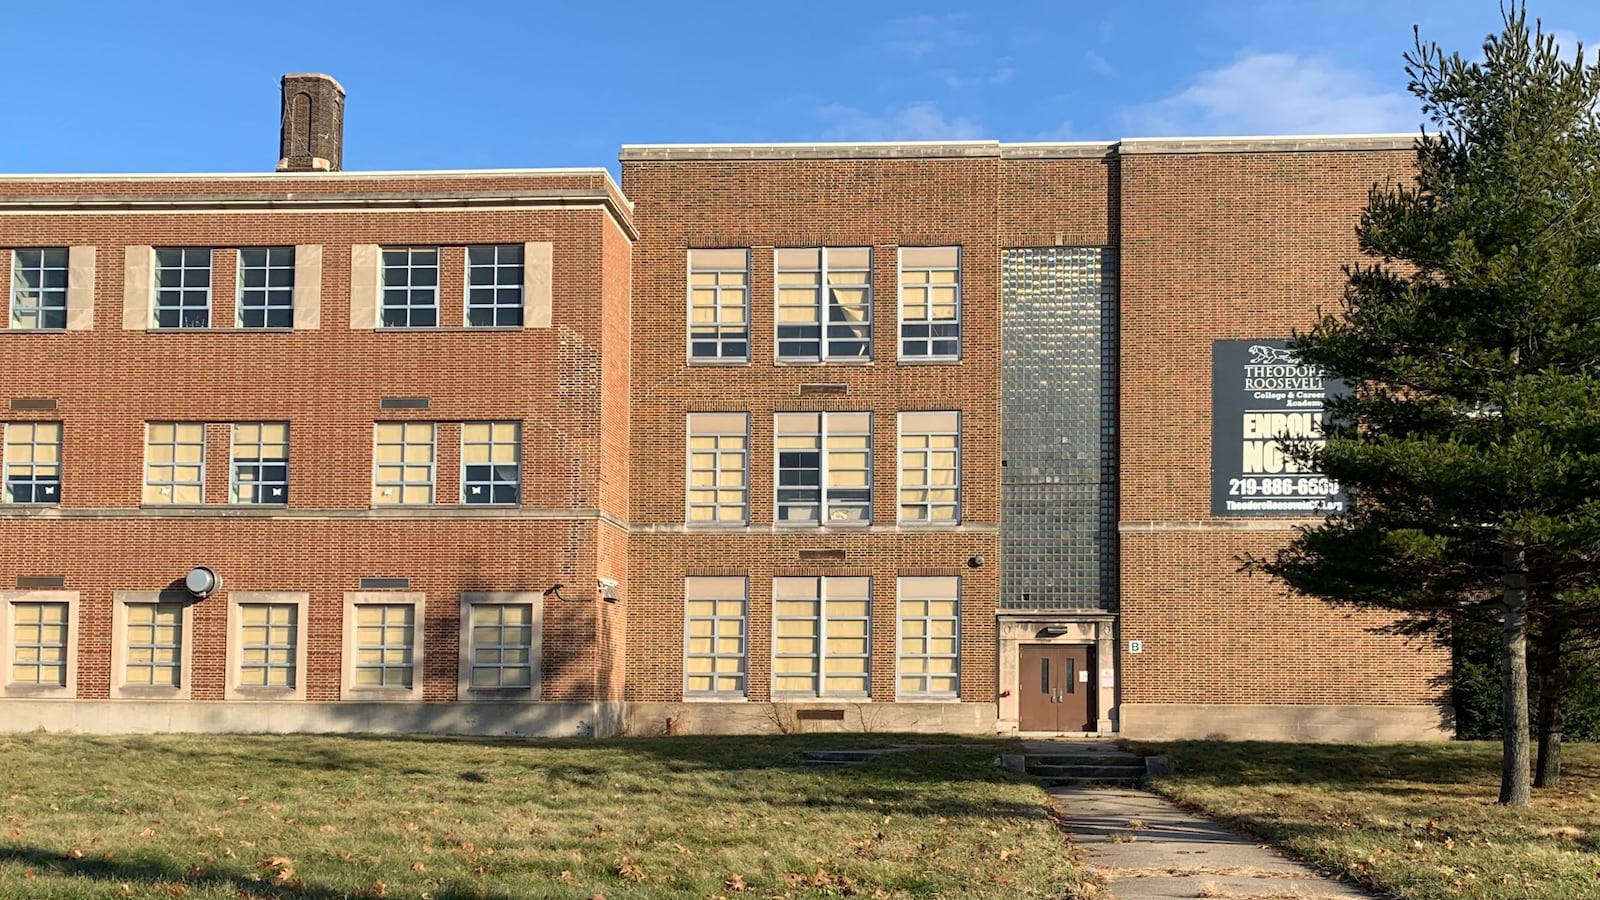 Theodore Roosevelt College & Career Academy in Gary sits empty waiting for repairs in December 2019.